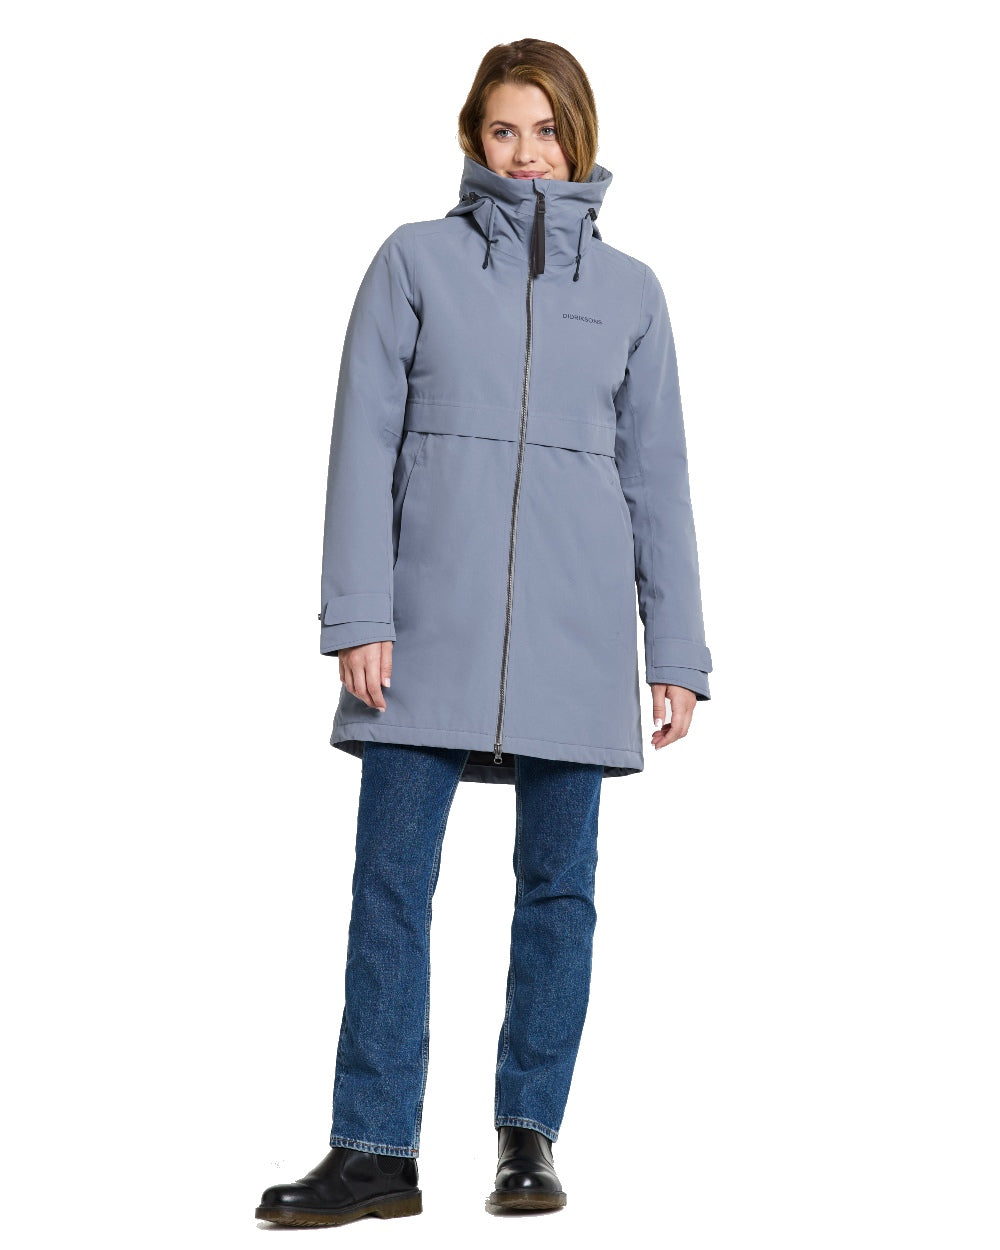 Didriksons Helle Ladies Parka 5 in Glacial Blue 